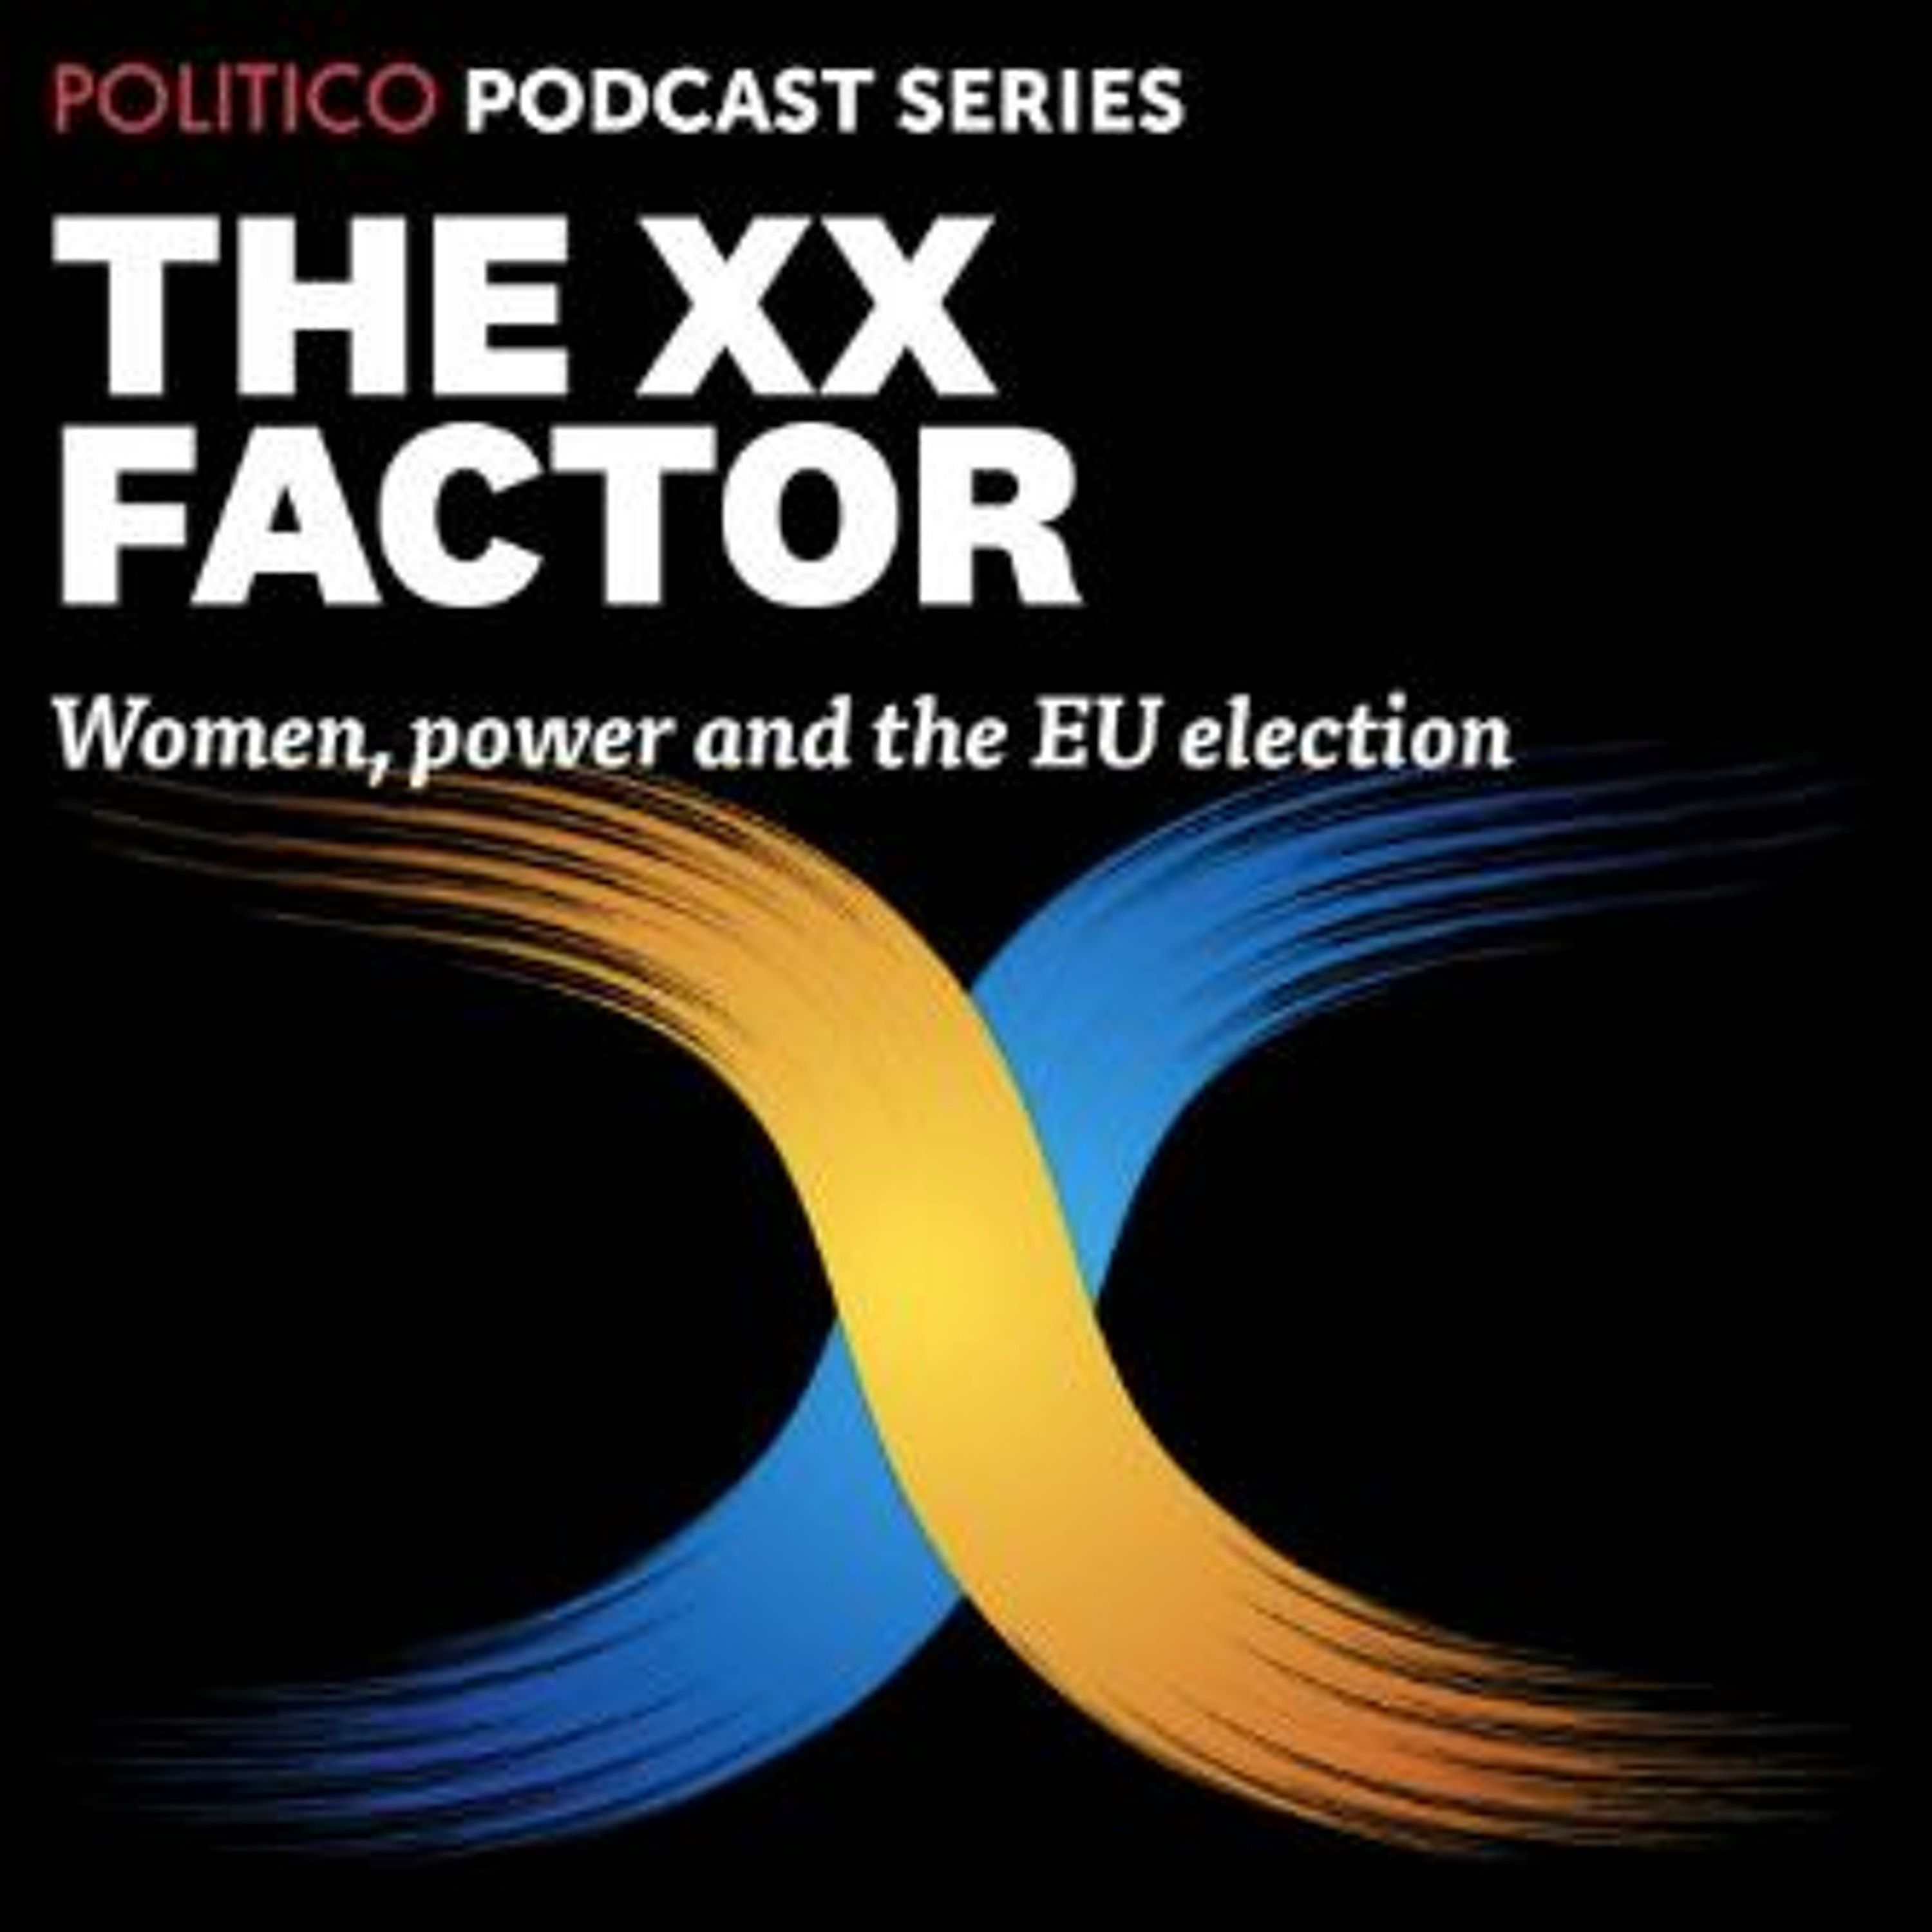 XX Factor Episode 4 — What can Europe learn from around the world?